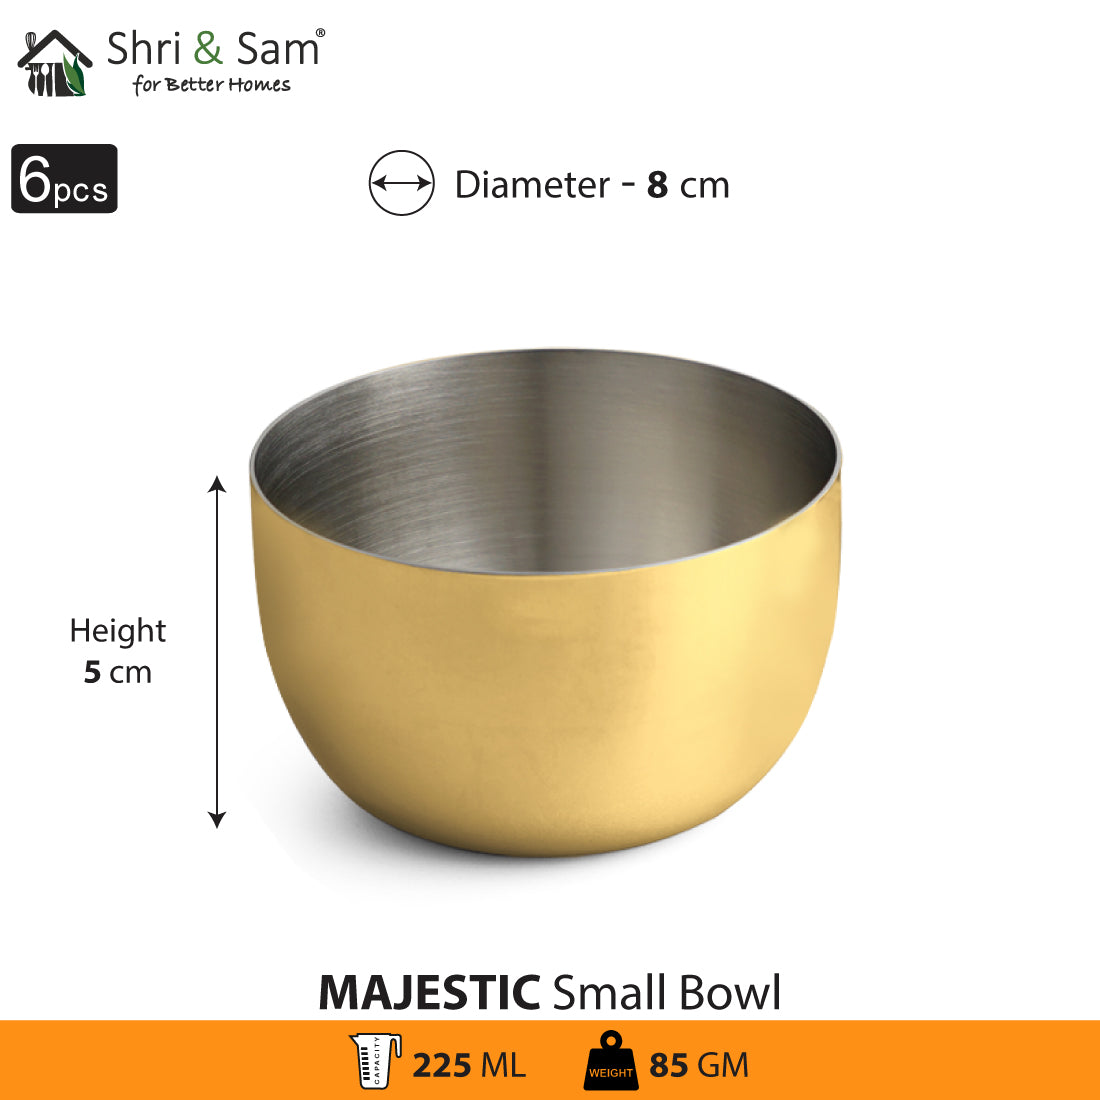 Stainless Steel 6 PCS Small Bowl with Gold PVD Coating Majestic